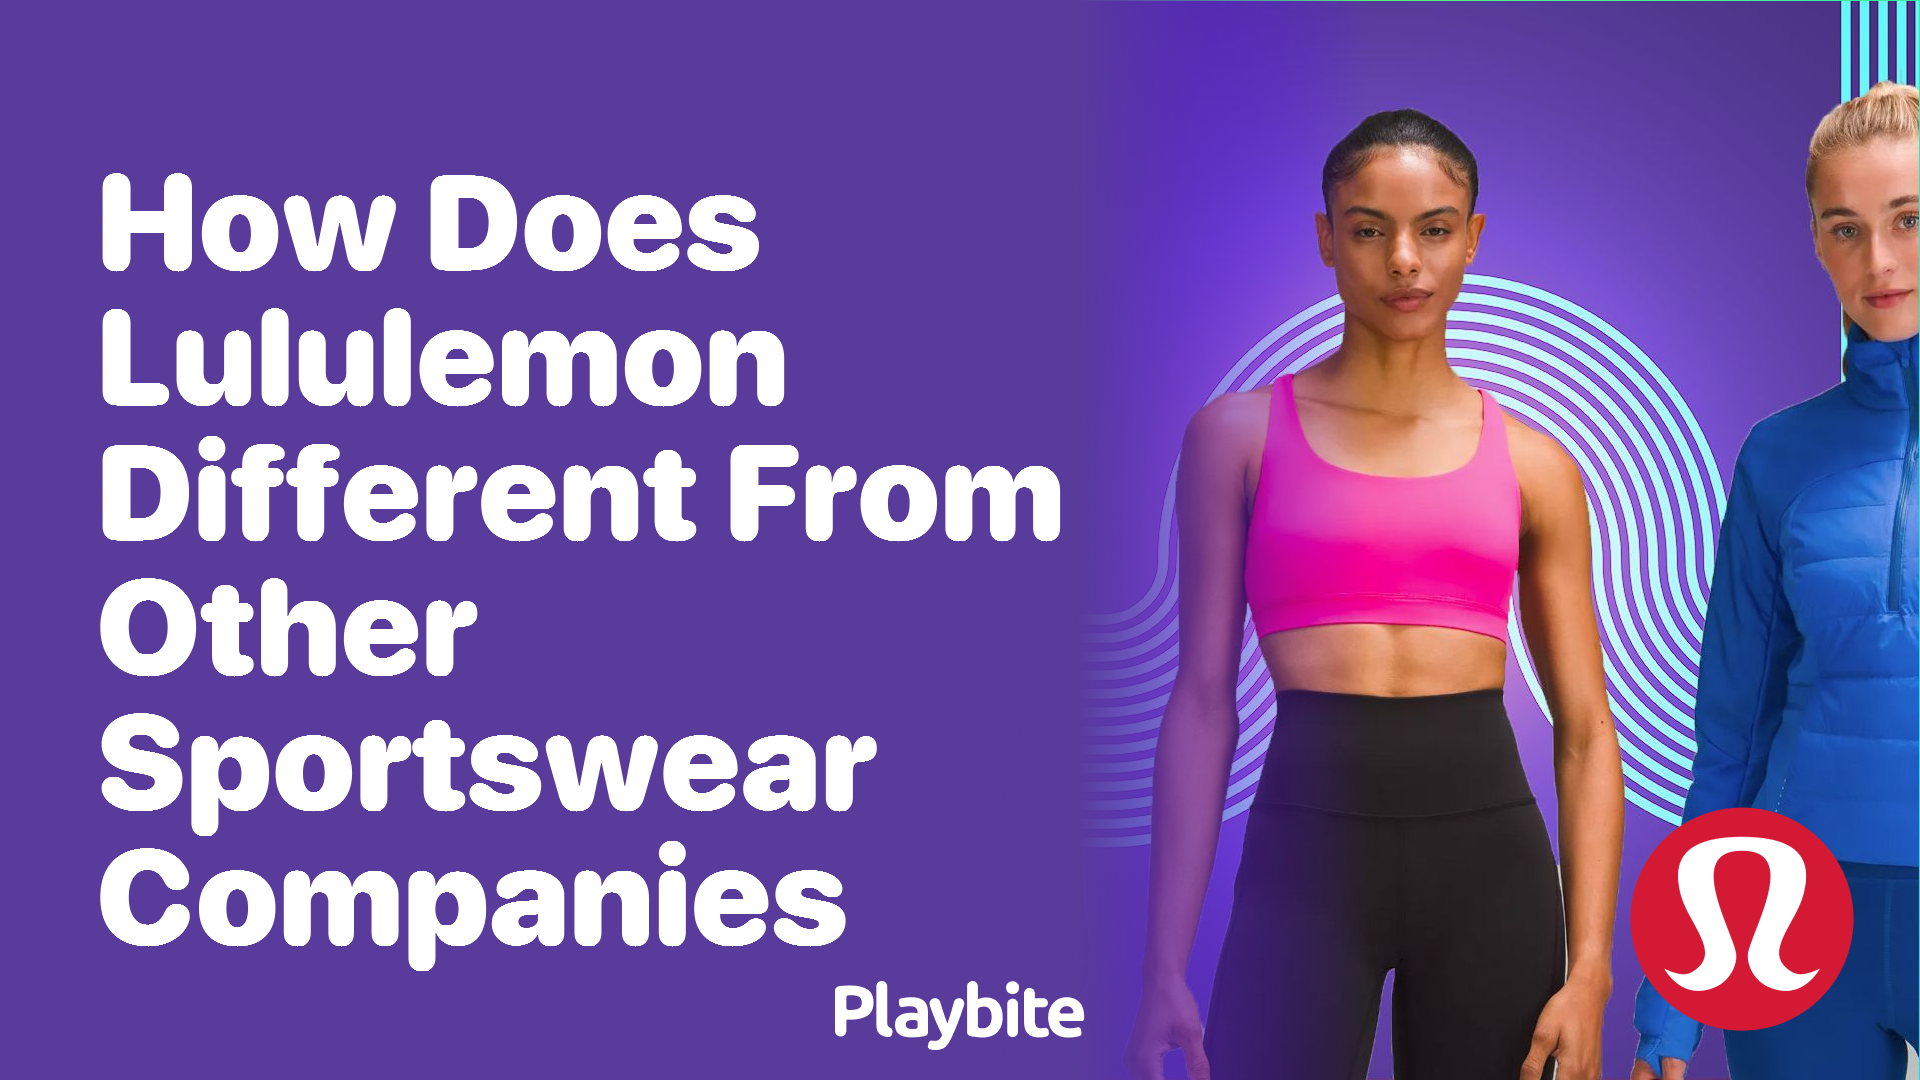 How Does Lululemon Stand Out From Other Sportswear Brands? - Playbite